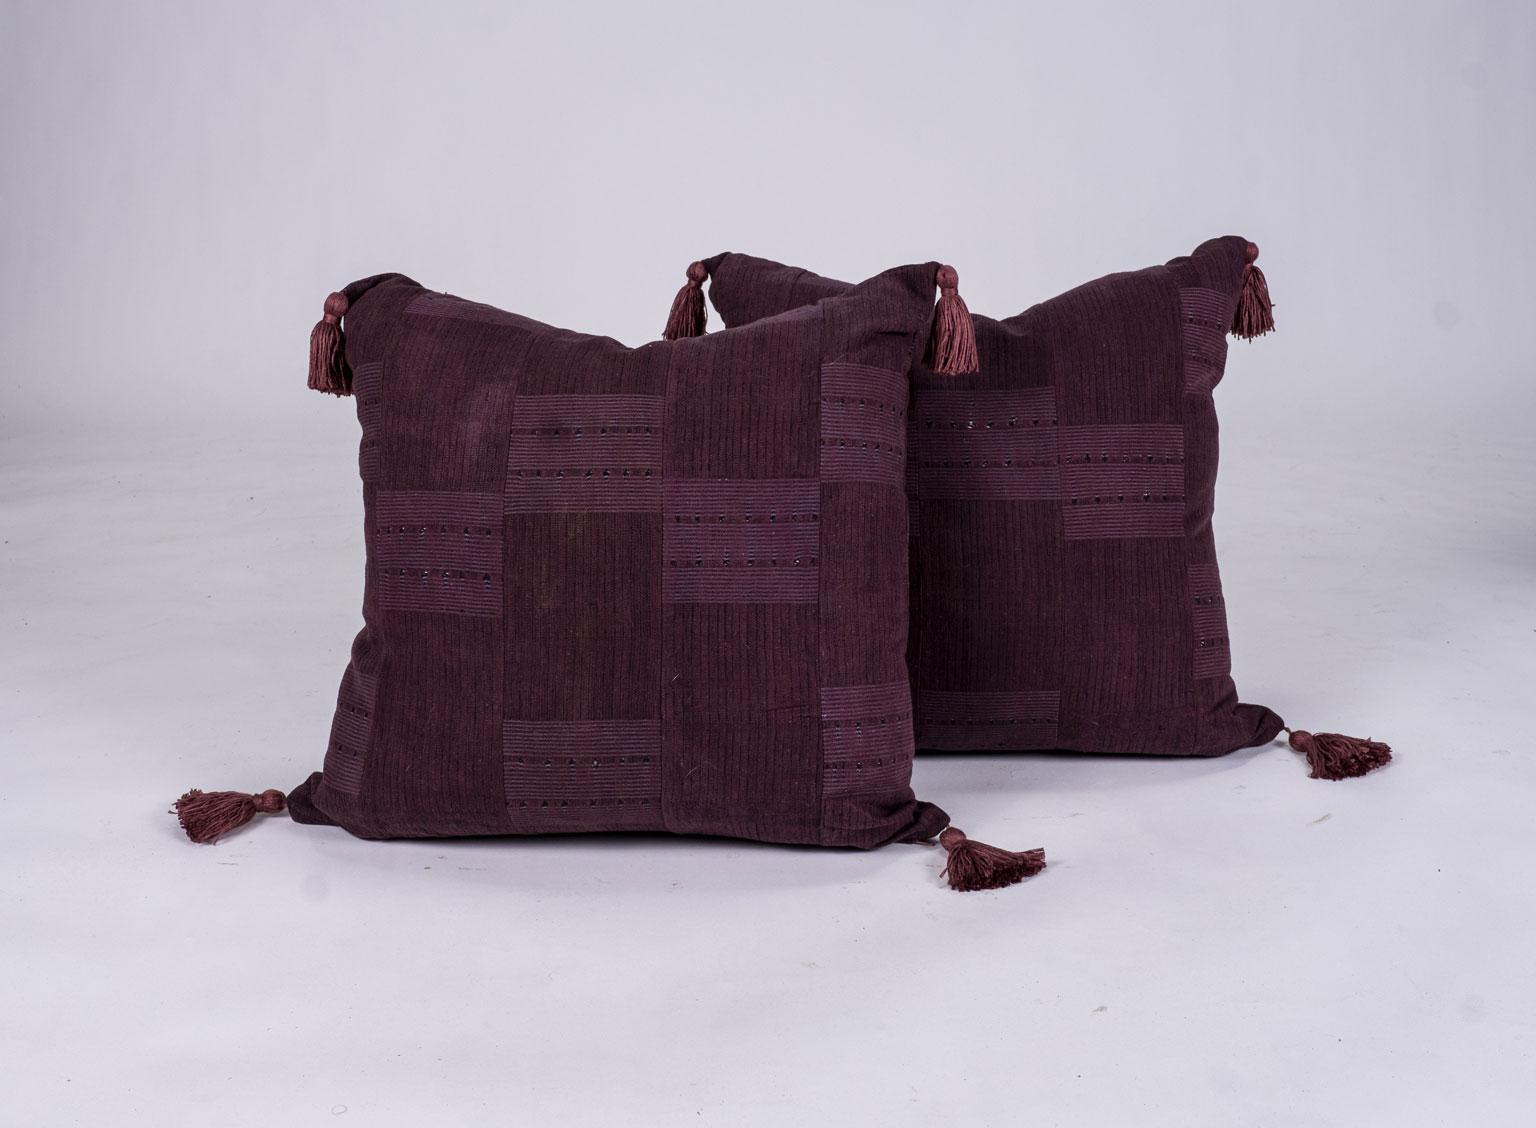 Hand-Woven Plum Color Cushions with Tassels